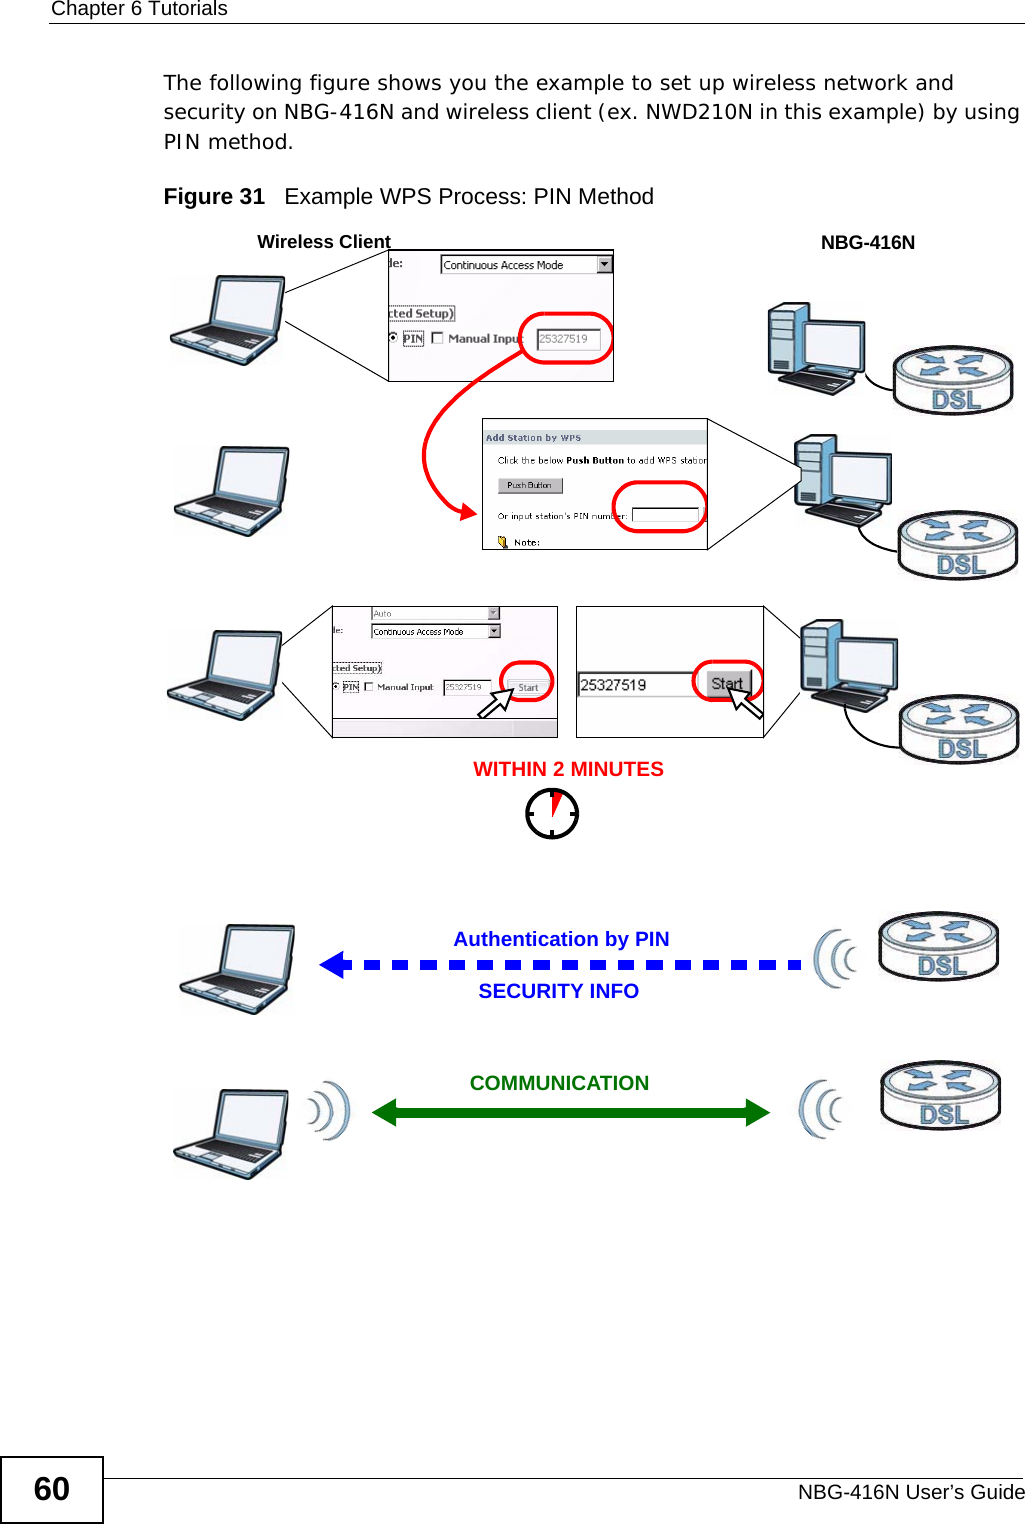 Chapter 6 TutorialsNBG-416N User’s Guide60The following figure shows you the example to set up wireless network and security on NBG-416N and wireless client (ex. NWD210N in this example) by using PIN method. Figure 31   Example WPS Process: PIN MethodAuthentication by PINSECURITY INFOWITHIN 2 MINUTESWireless ClientNBG-416NCOMMUNICATION